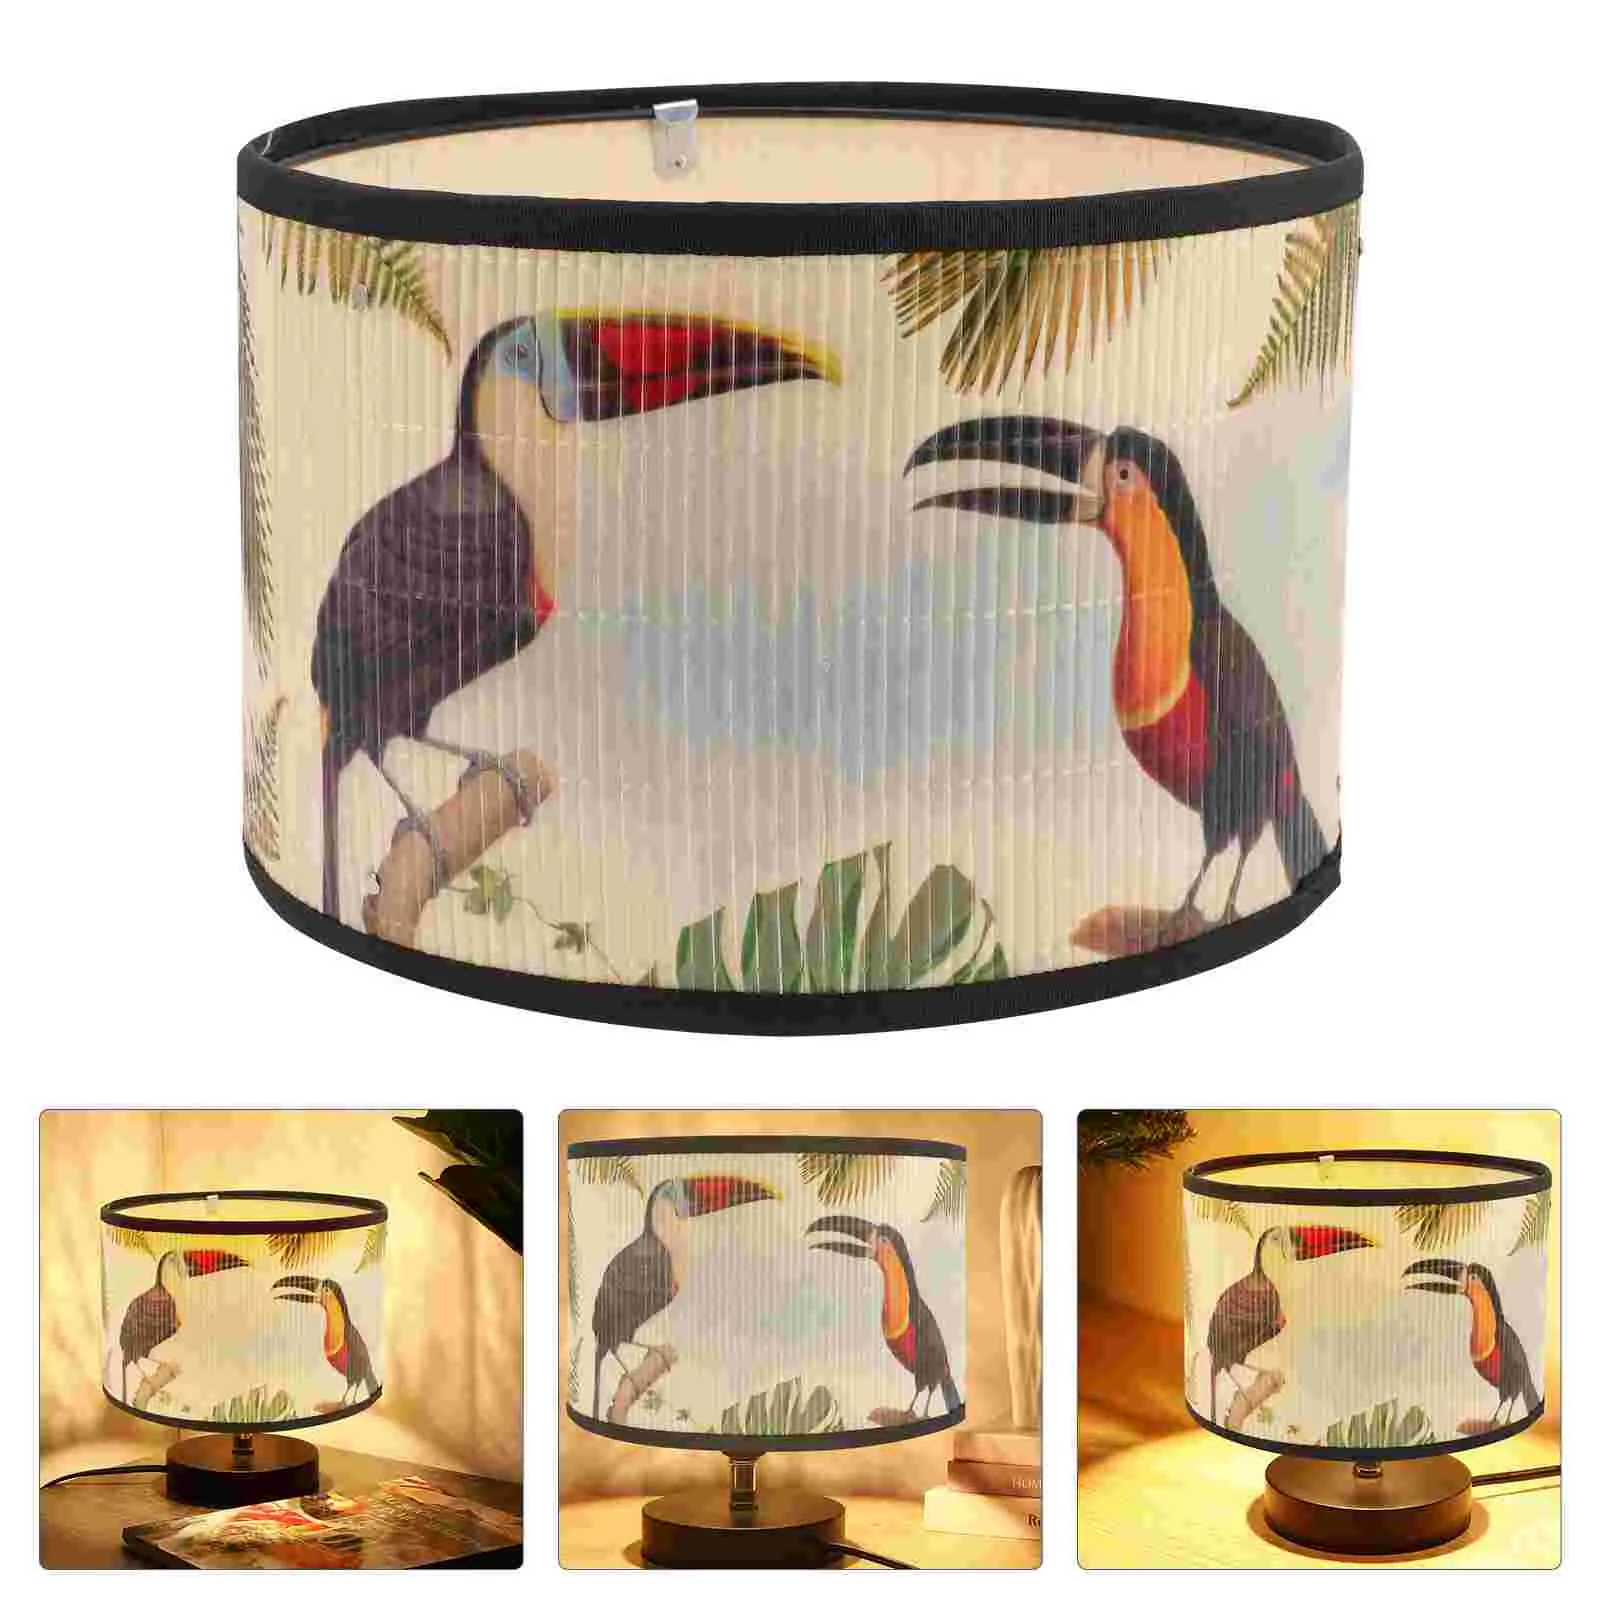 

Drum Retro Decor E27 Vintage Bamboo Lampshade Colorful Flower Bird Printed Chandelier Lamp Pattern Light Shade Accessories